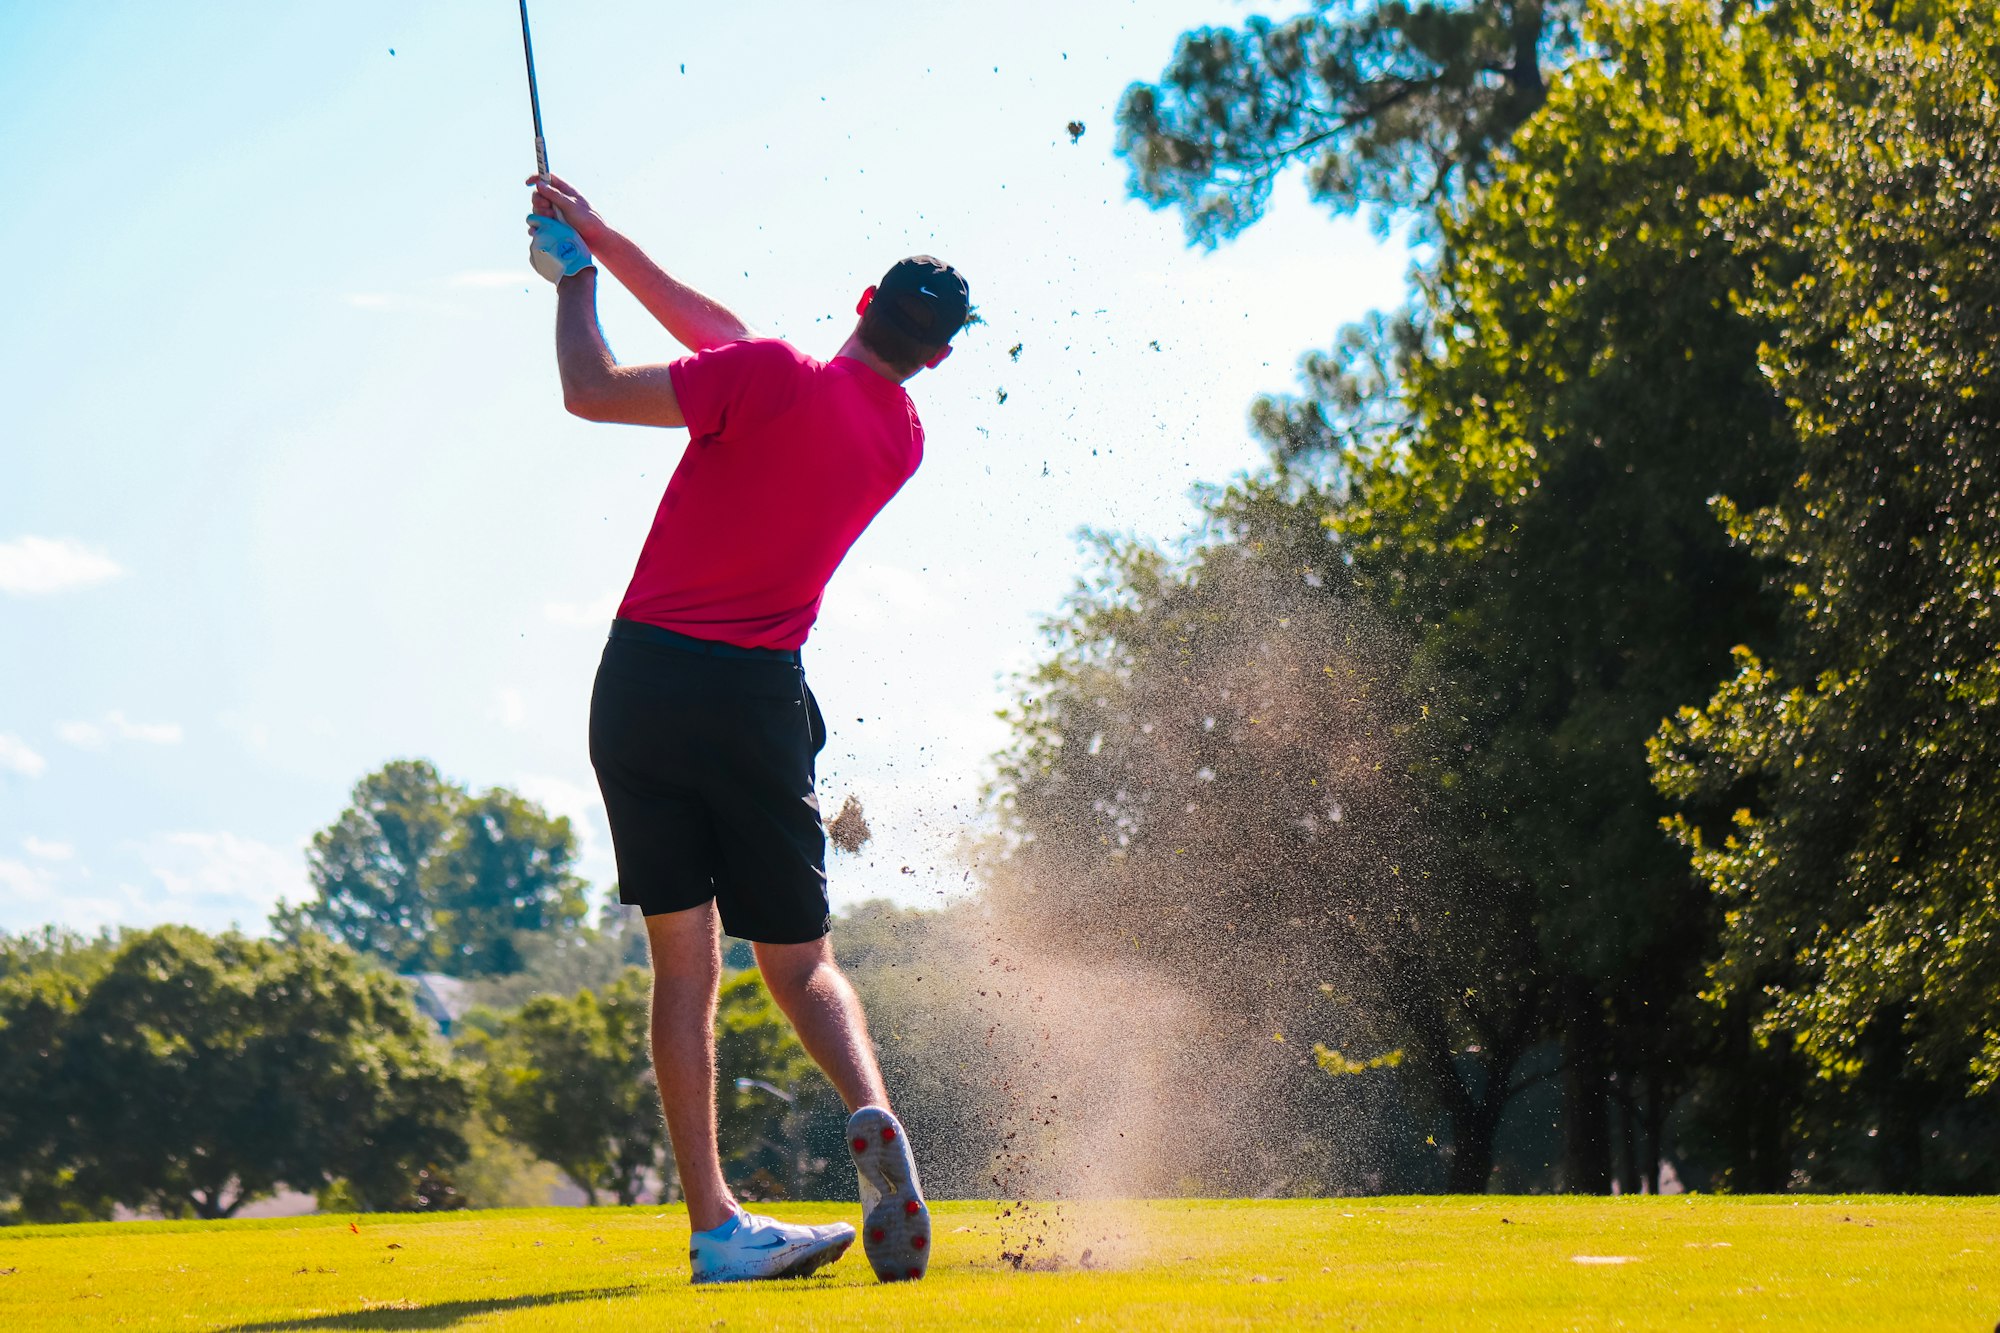 A man in a red shirt and black shorts swings at a golf ball